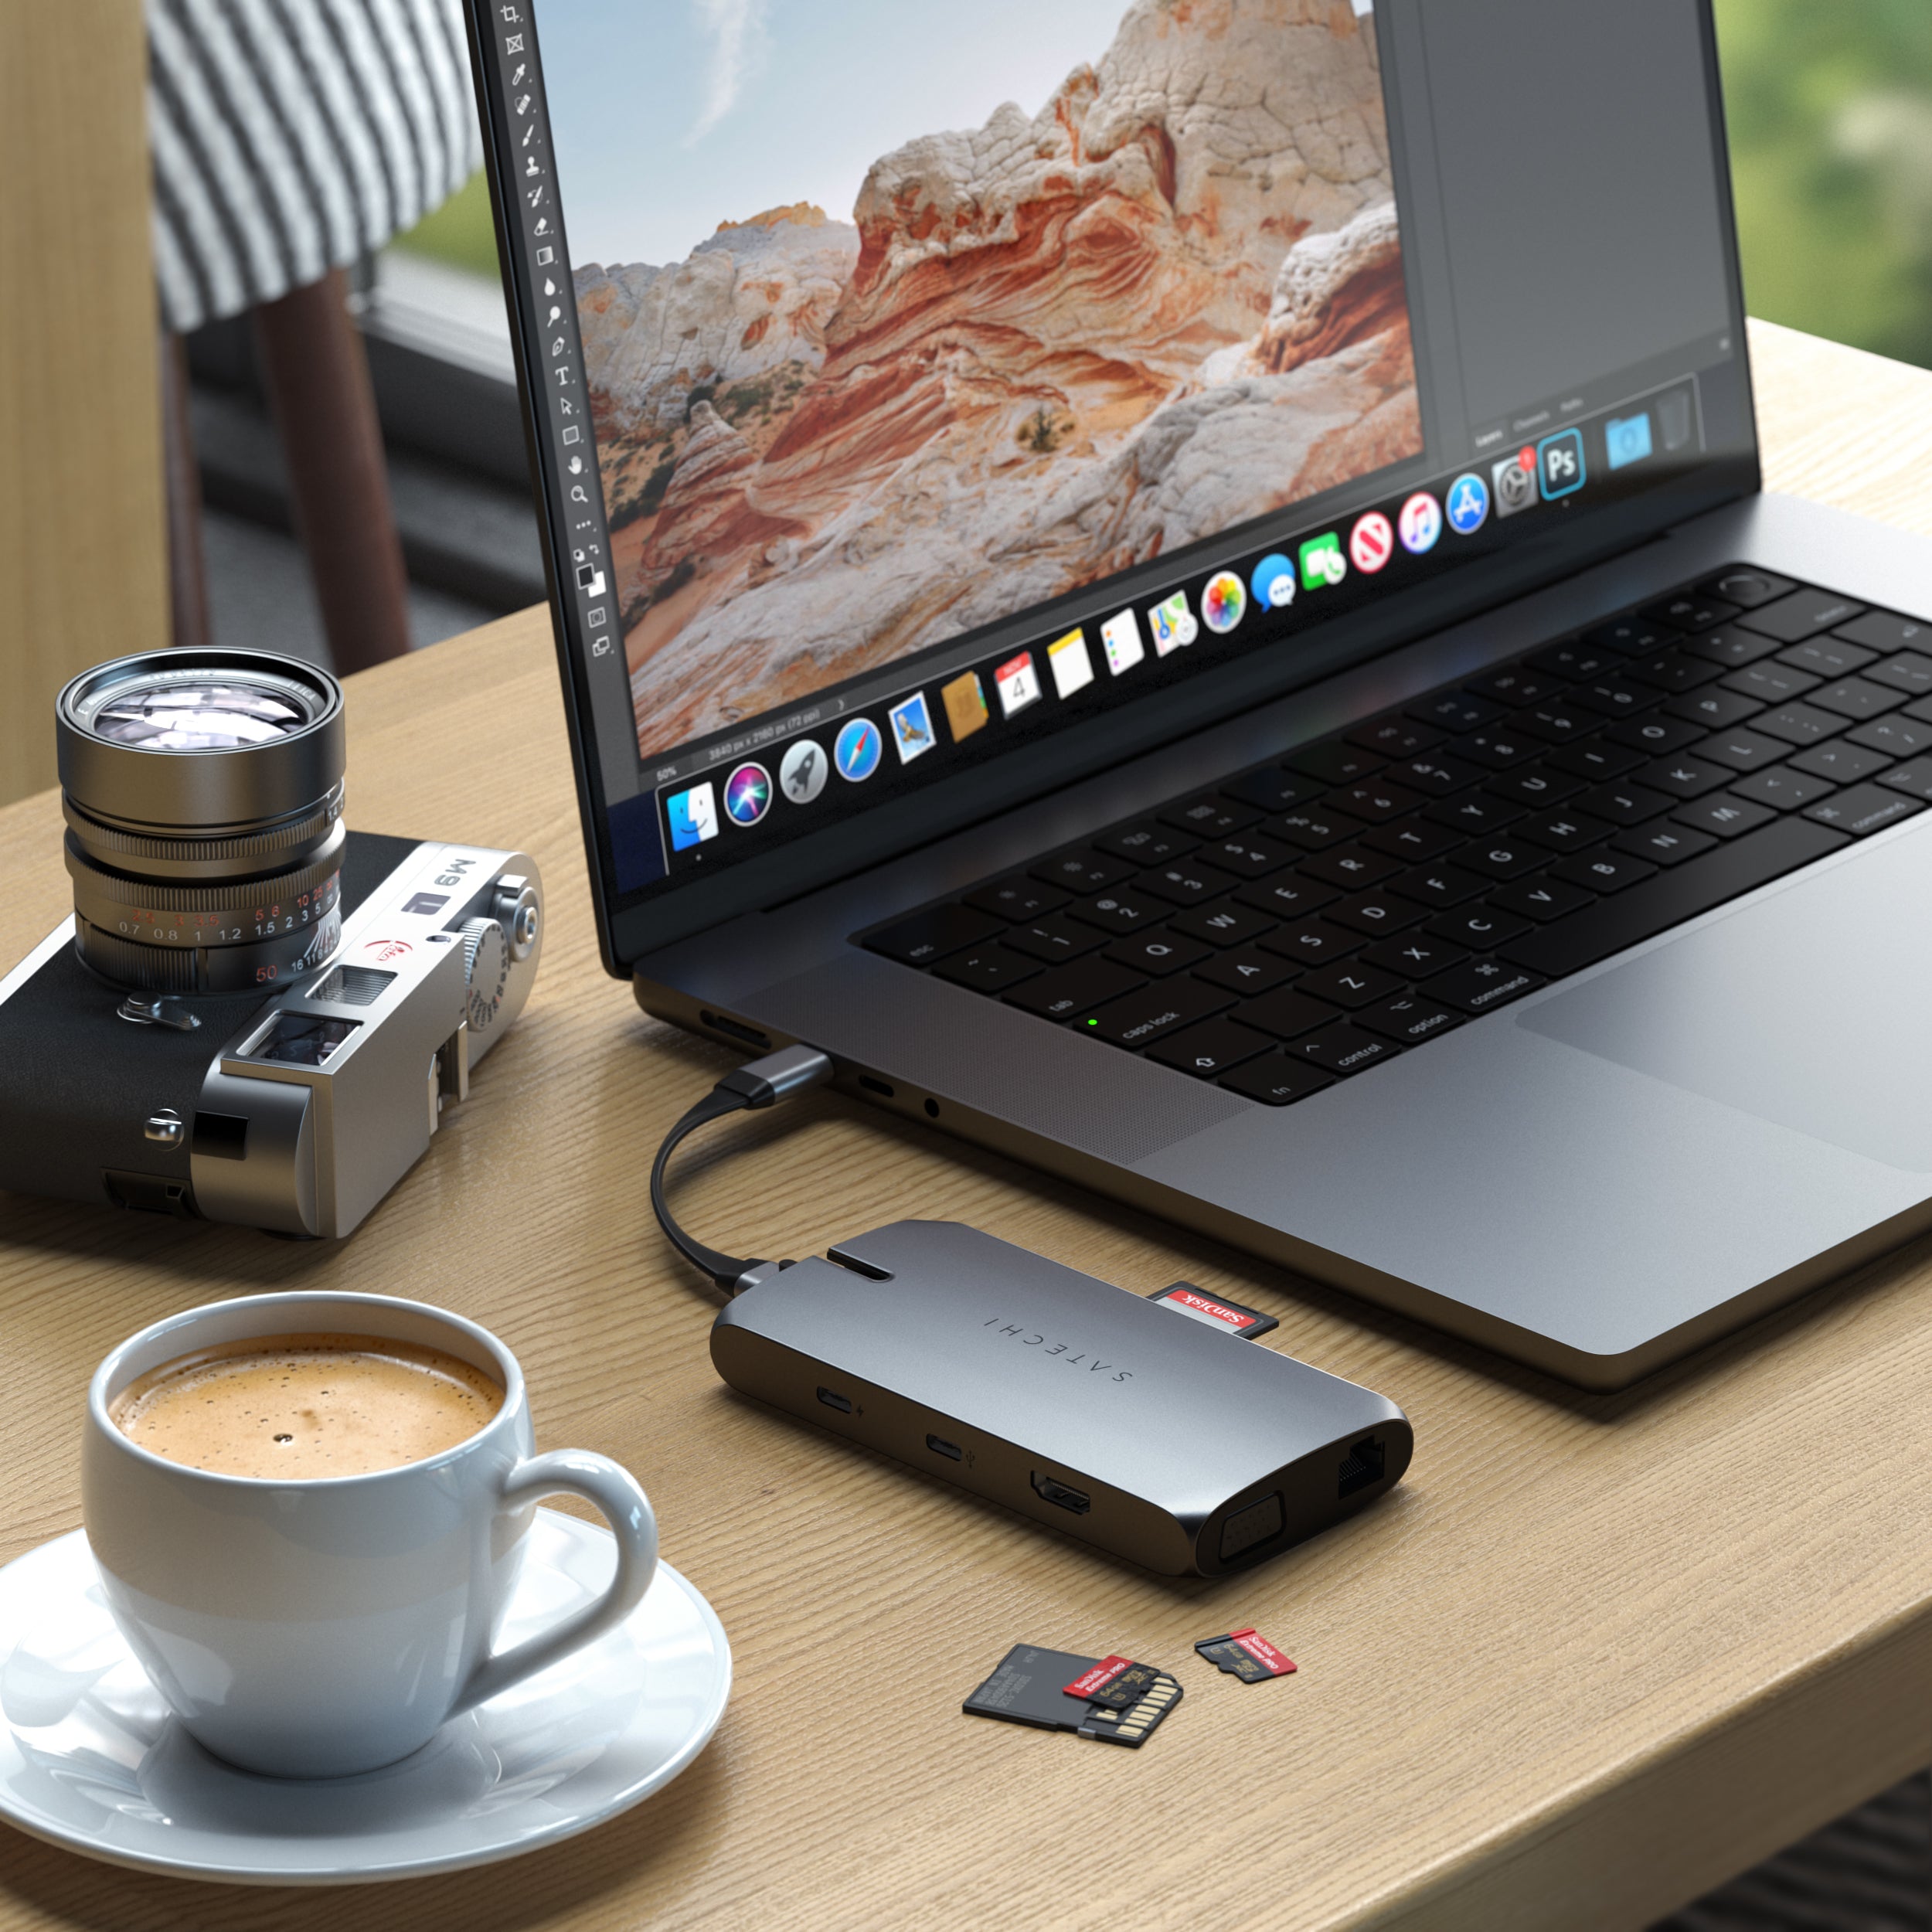 The Satechi USB-C On-the-Go Multiport Adapter helps make productivity portable